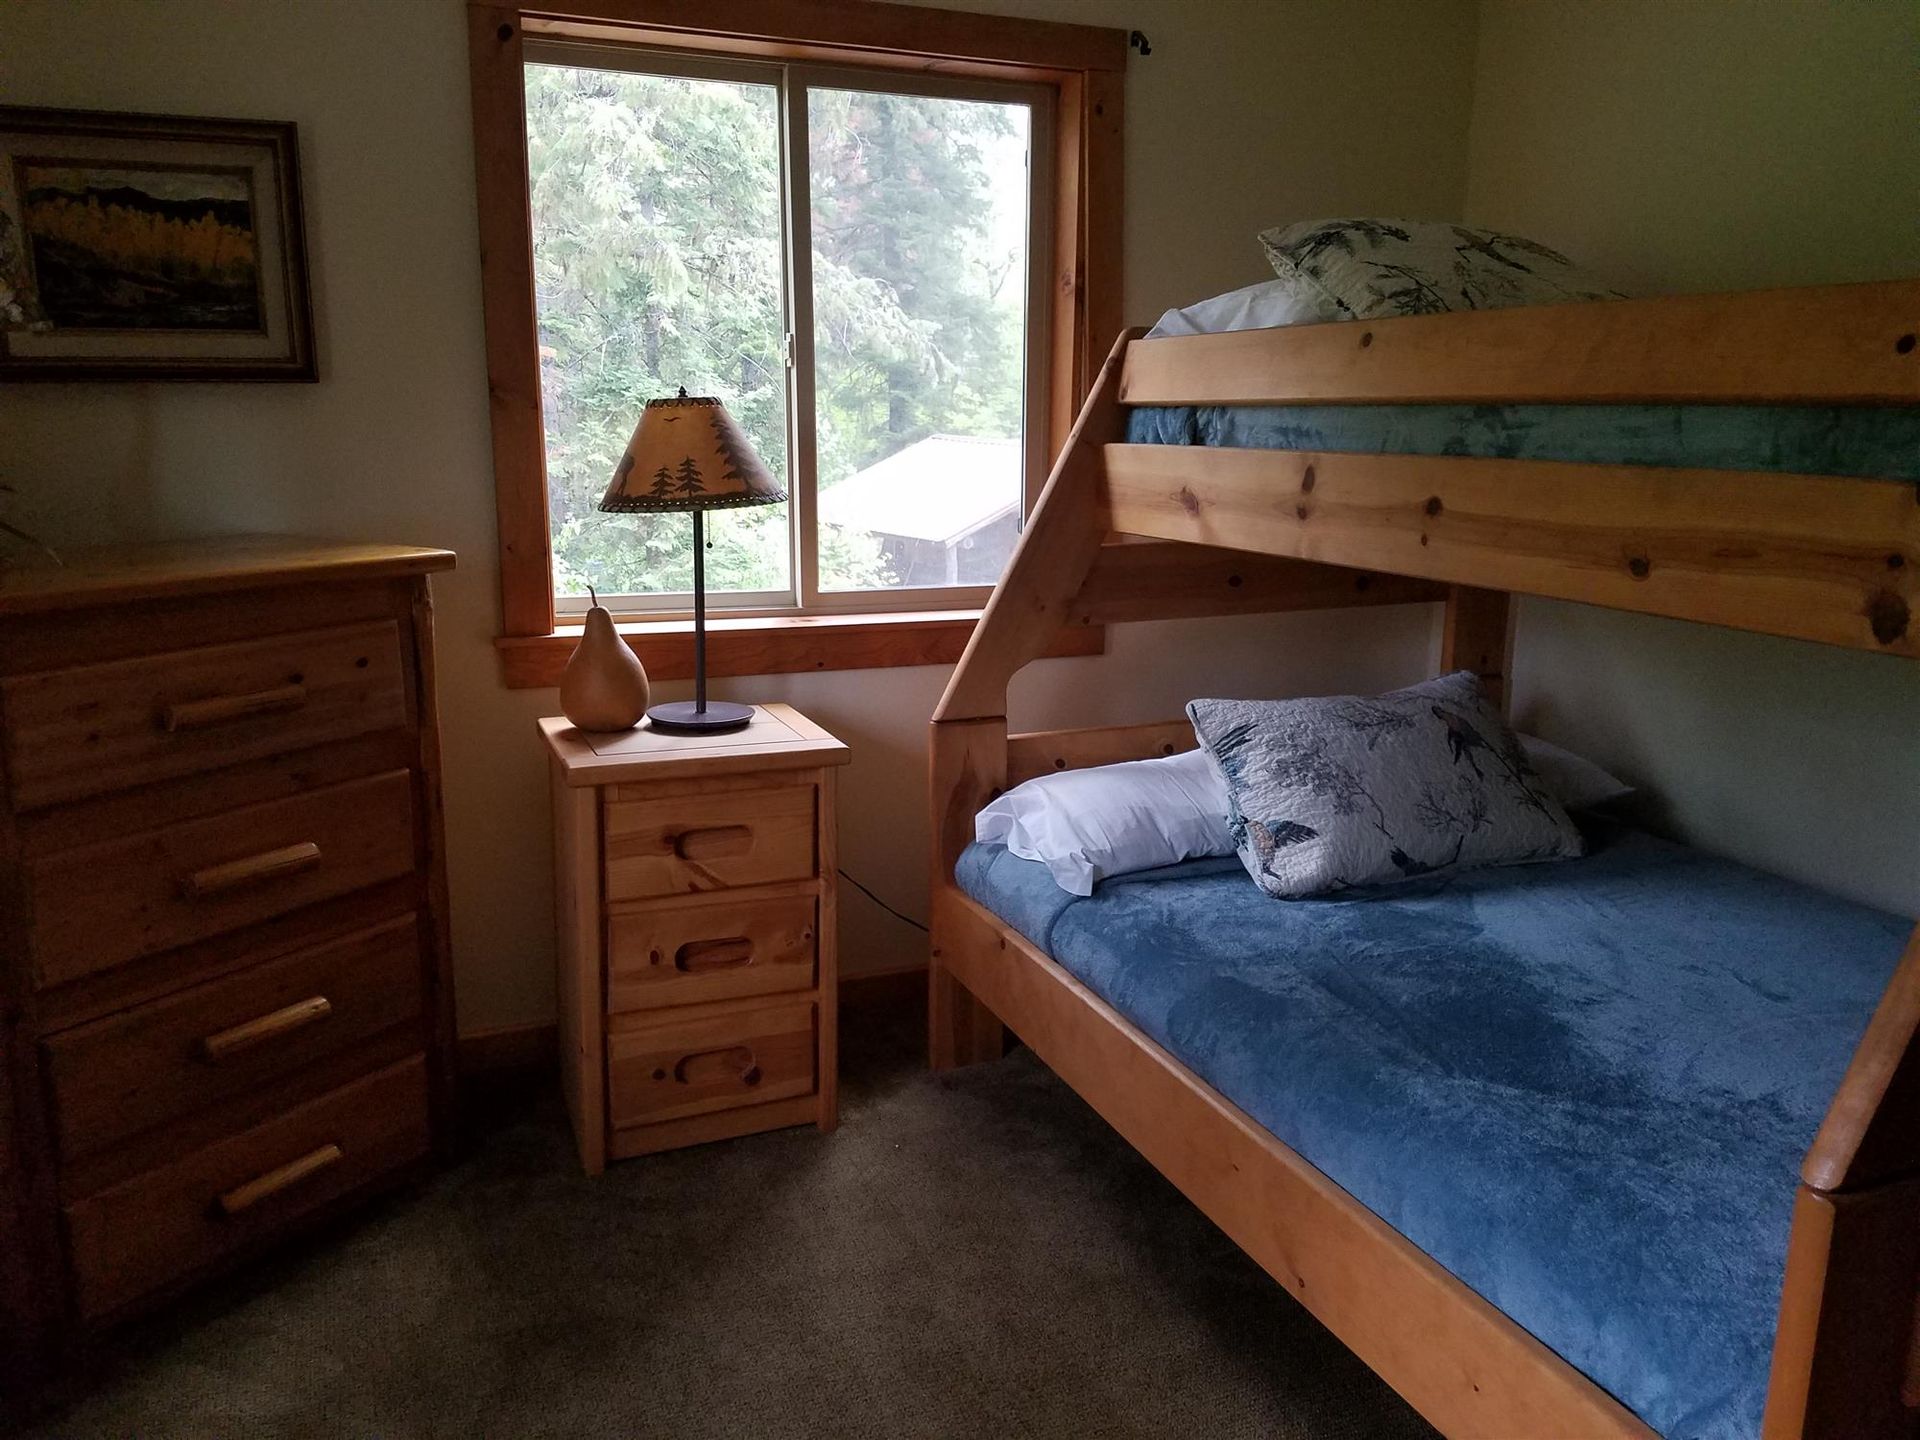 A bedroom with a bunk bed and a dresser